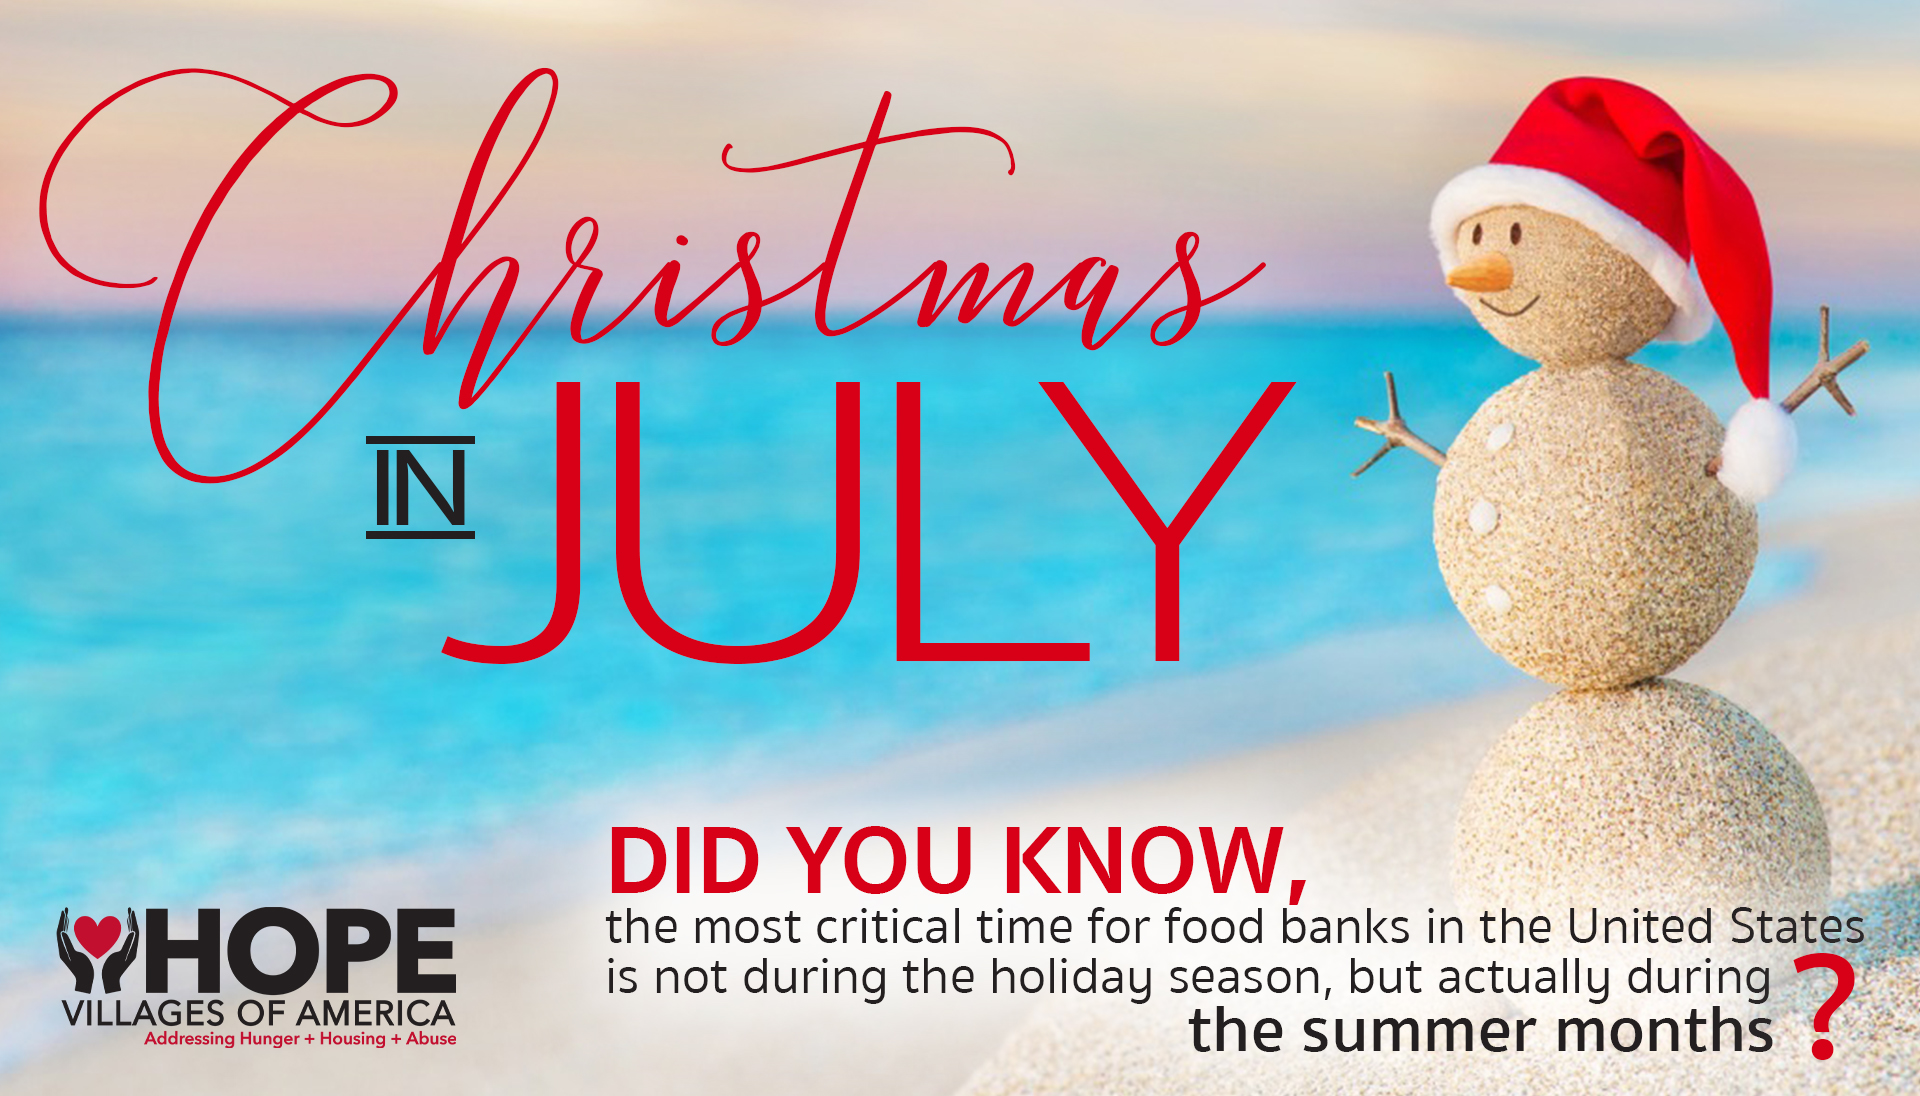 CHRISTMAS IN JULY Hope Villages of America is a nonprofit providing